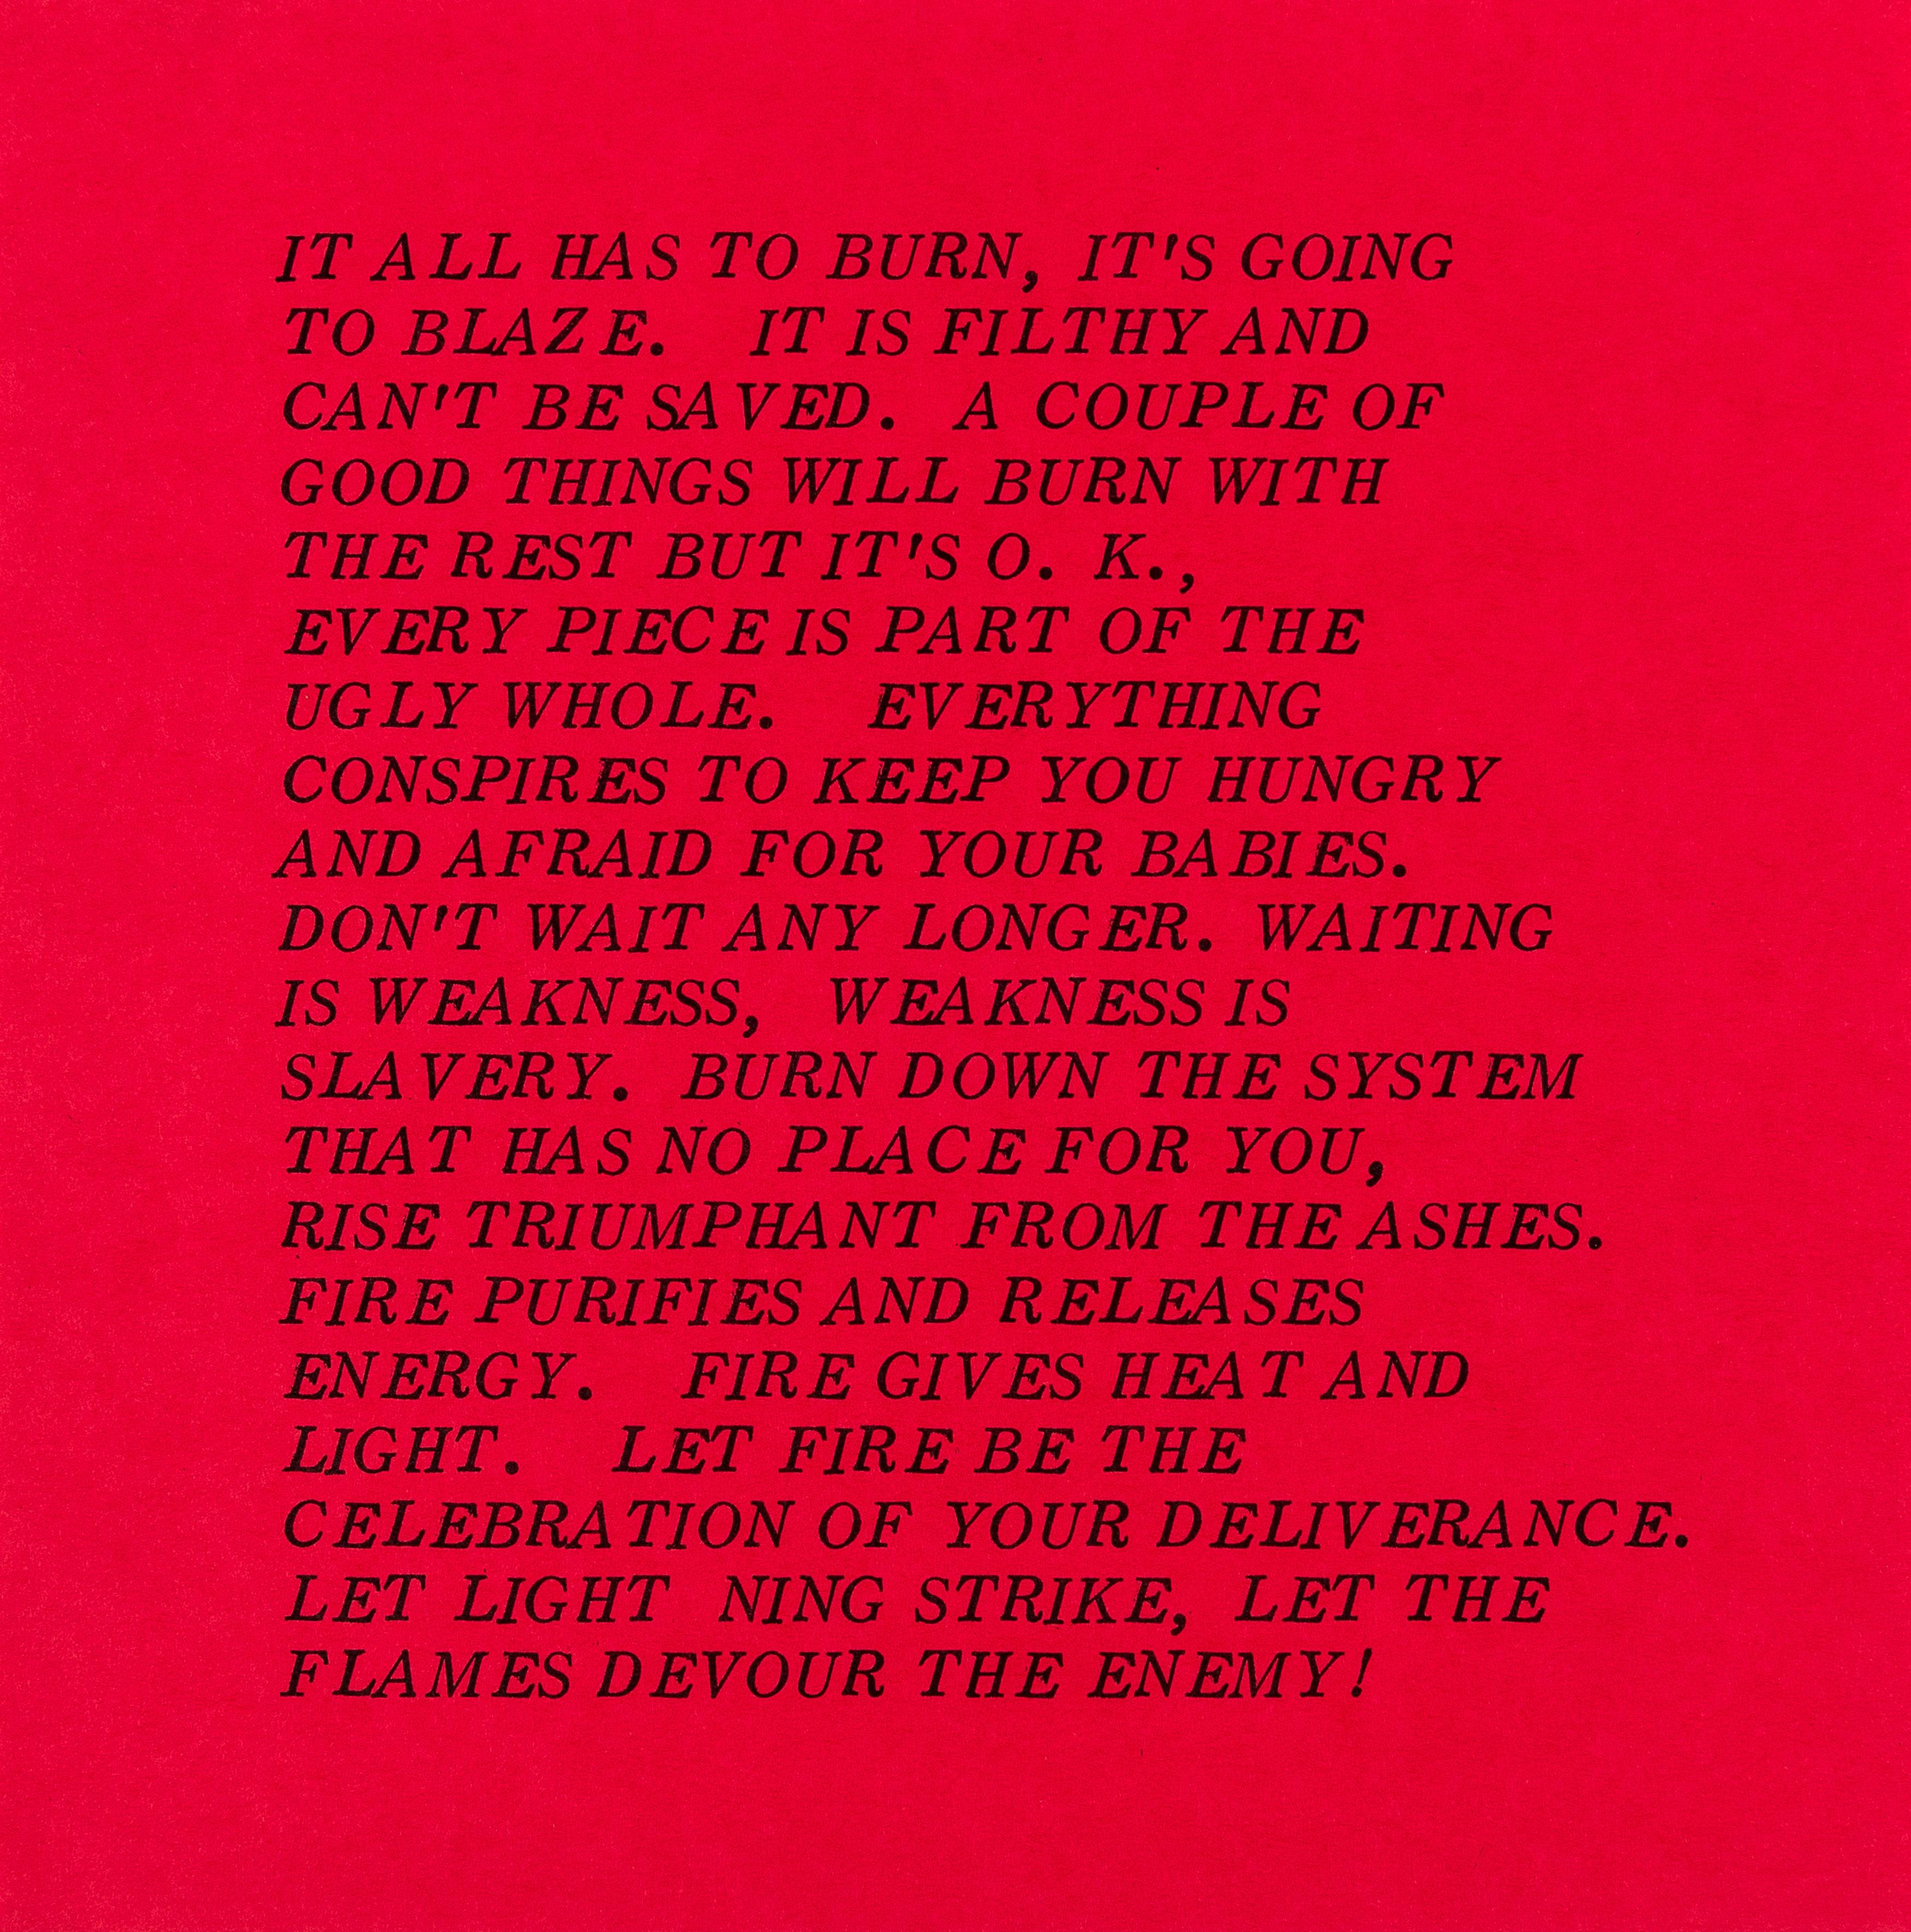 10 Inflammatory Essays 1979-1982 -- Lithograph, Small Set, Text Art by Holzer - Brown Print by Jenny Holzer